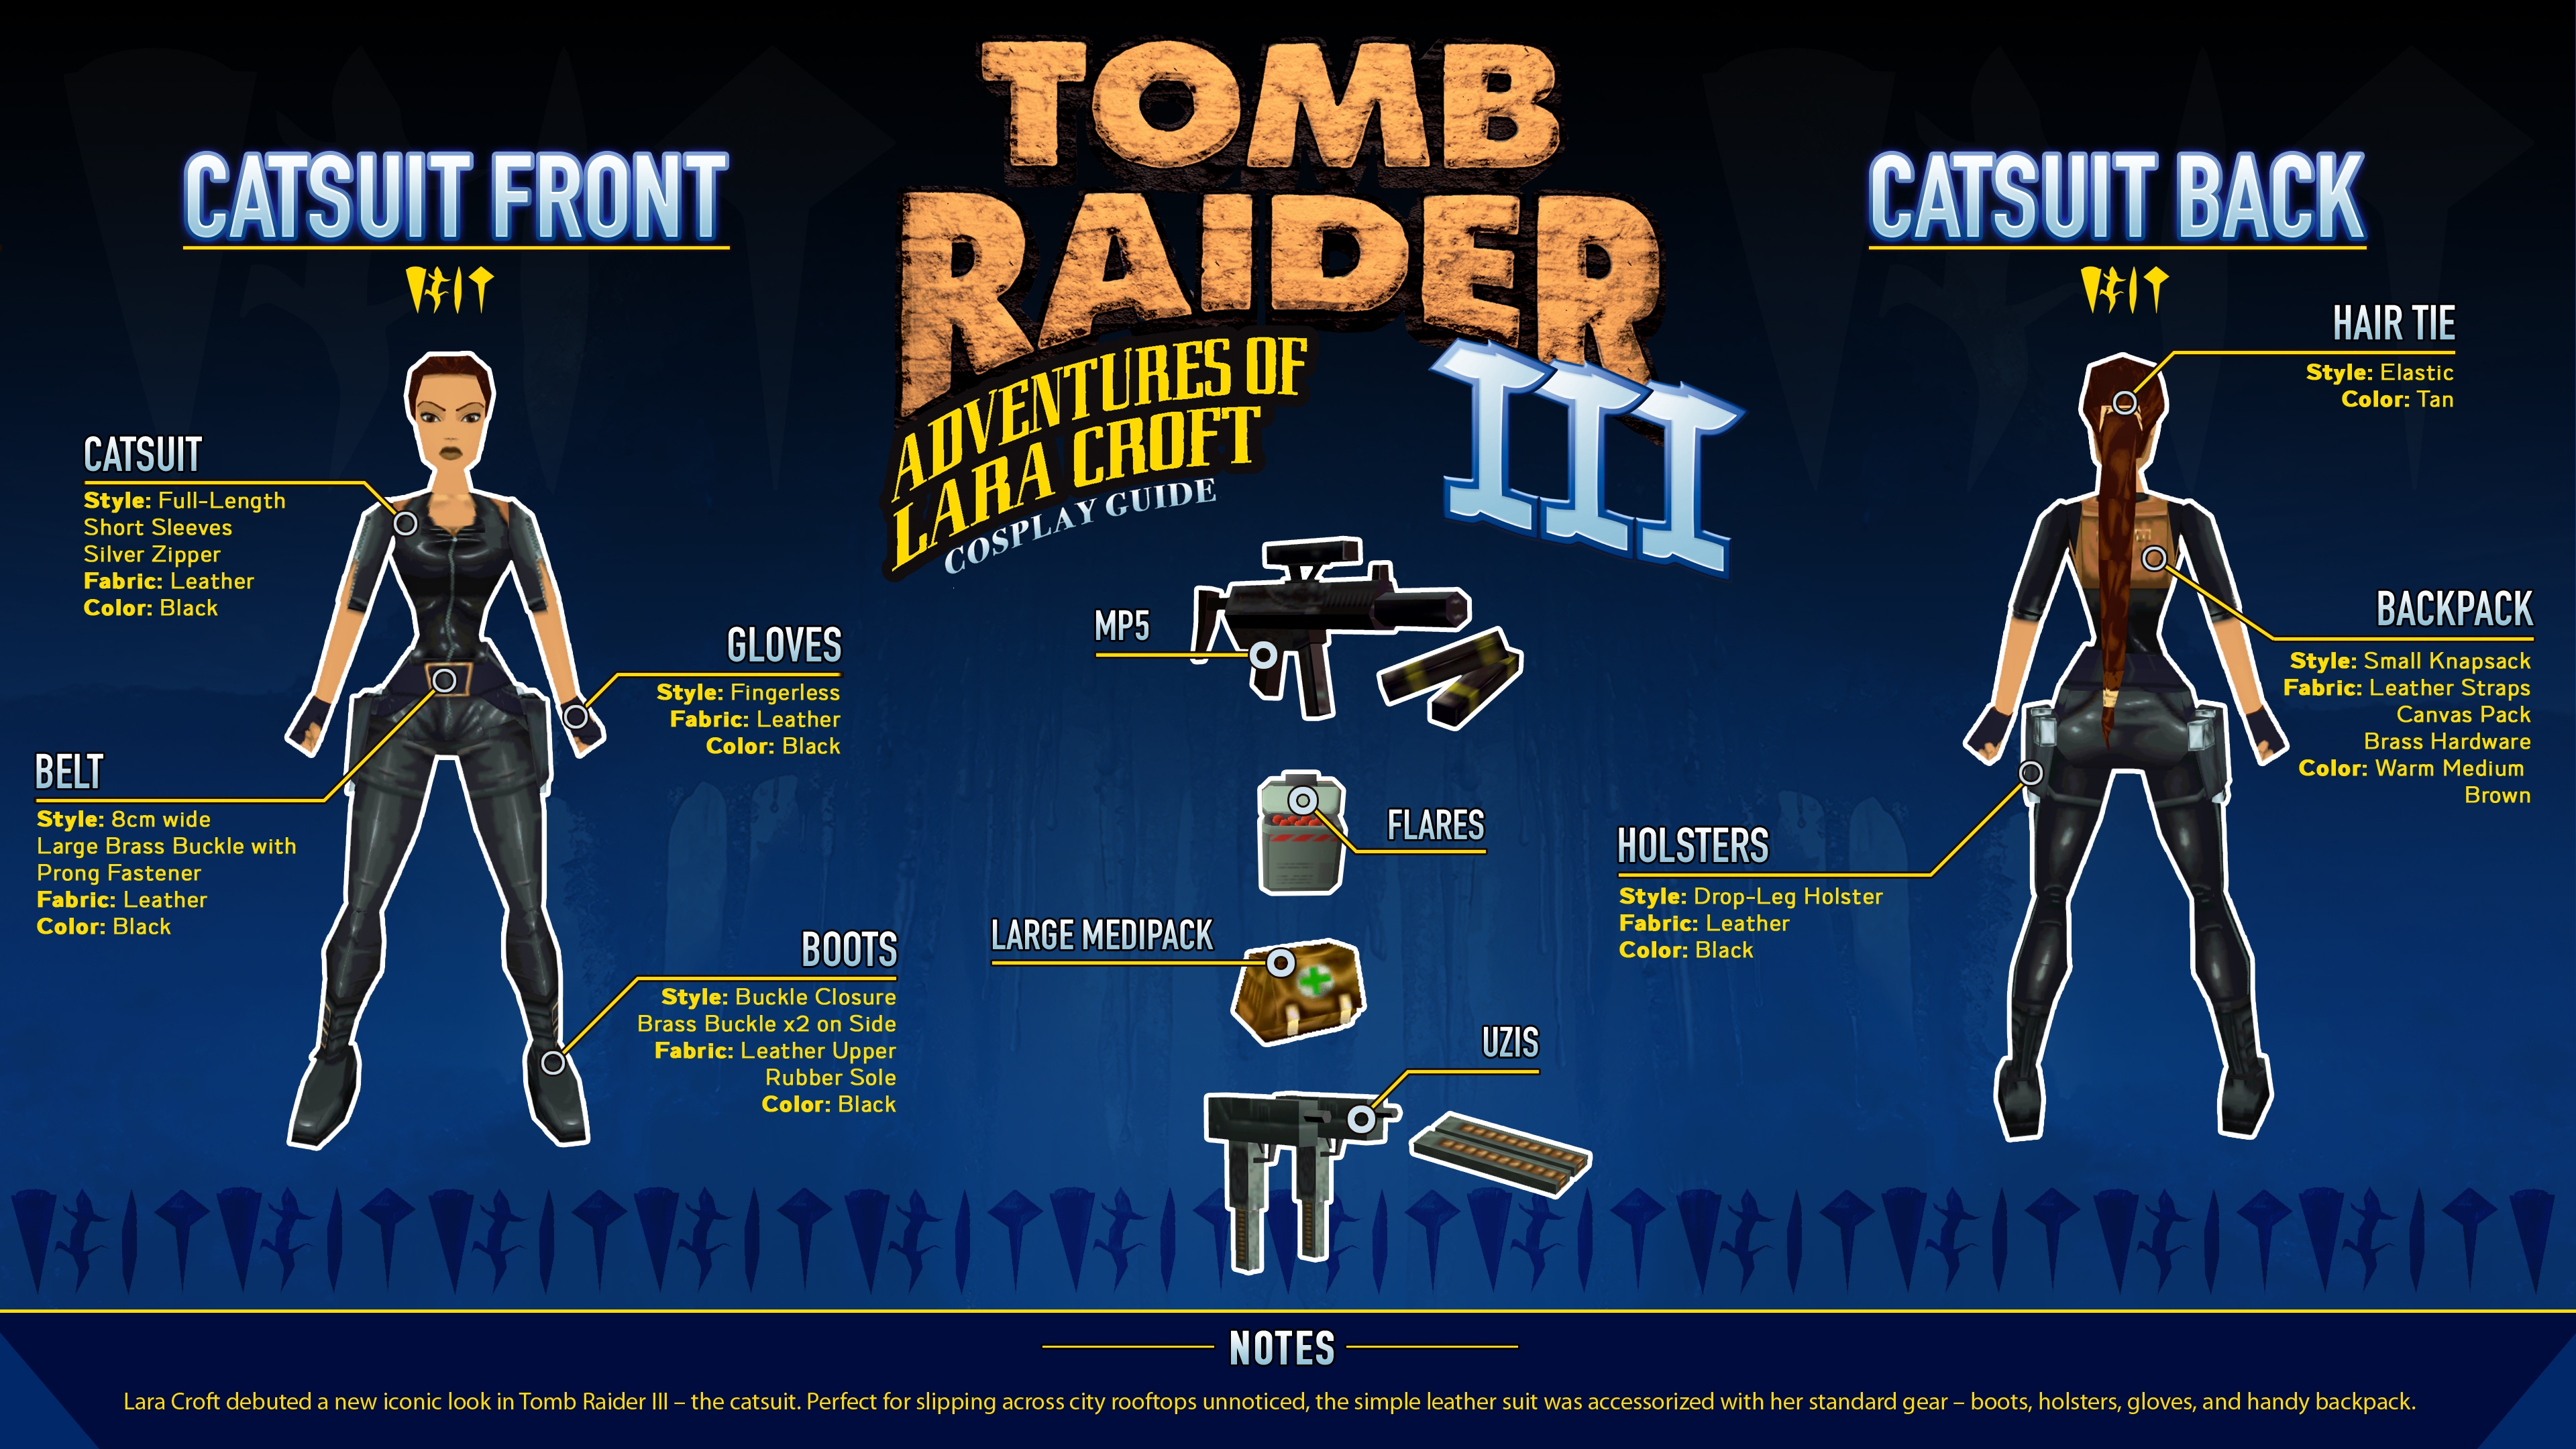 Cosplay Guide of Lara Croft's Catsuit outfit from Tomb Raider III